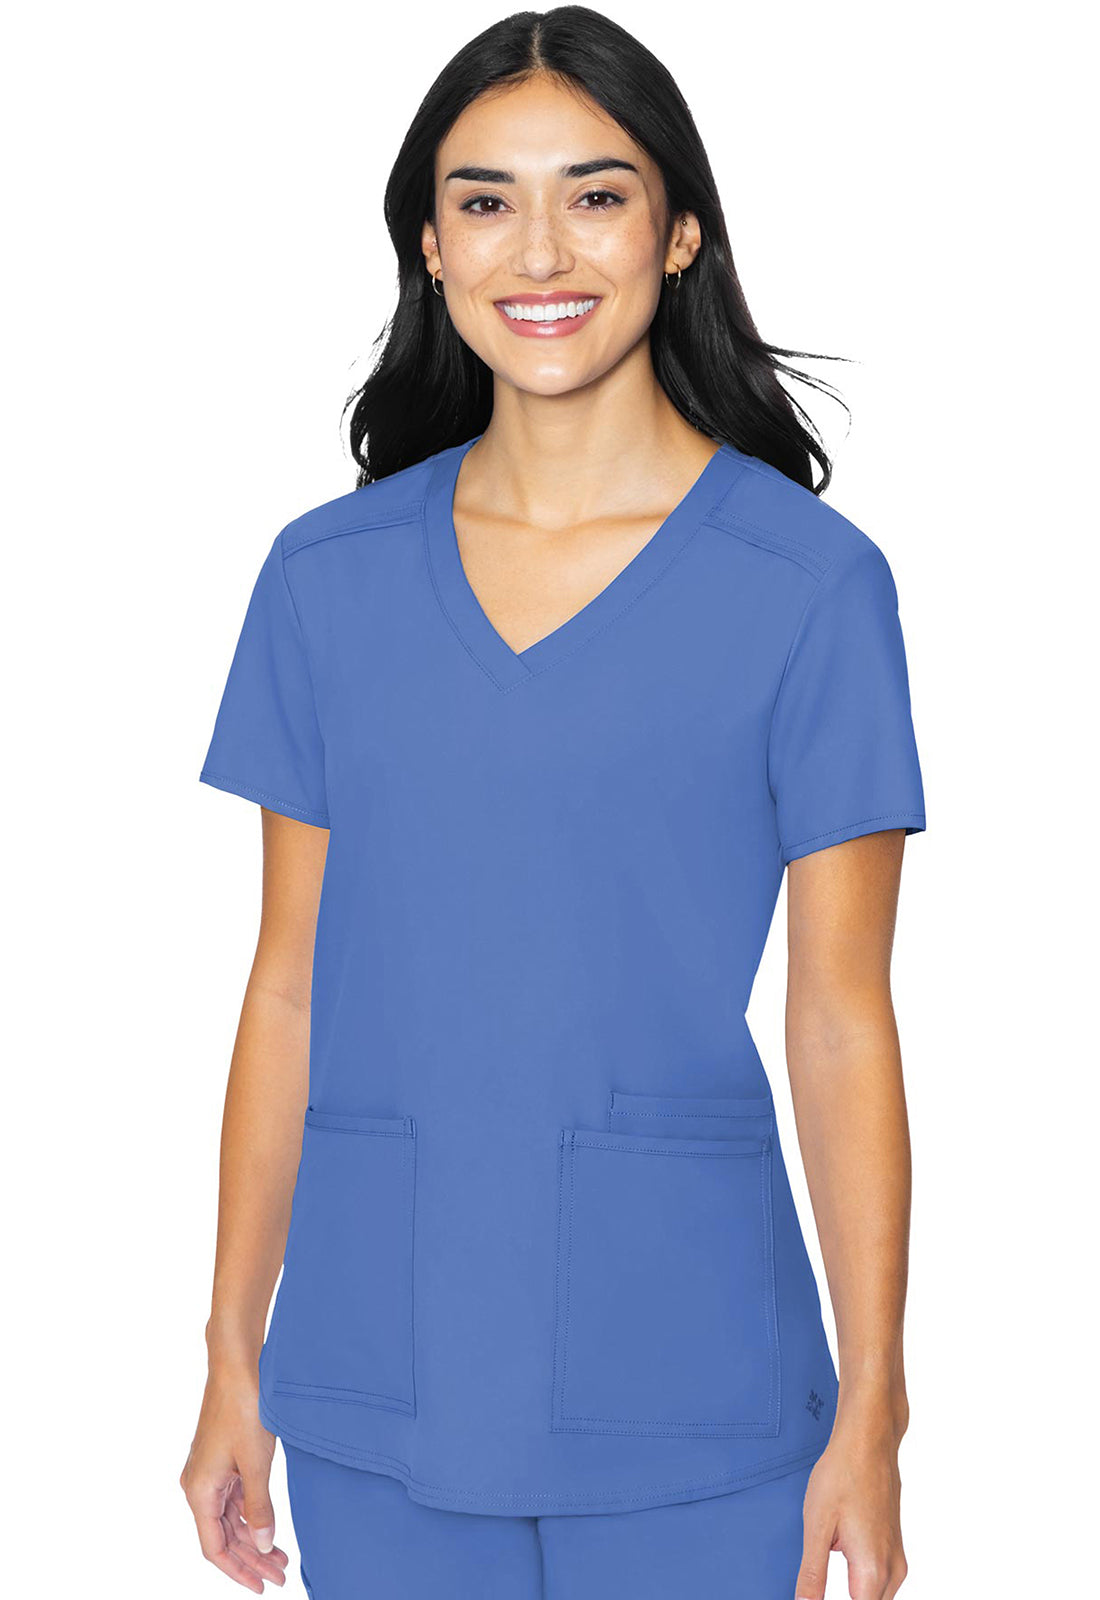 MC2411 - Med Couture Insight 3 Pocket Top